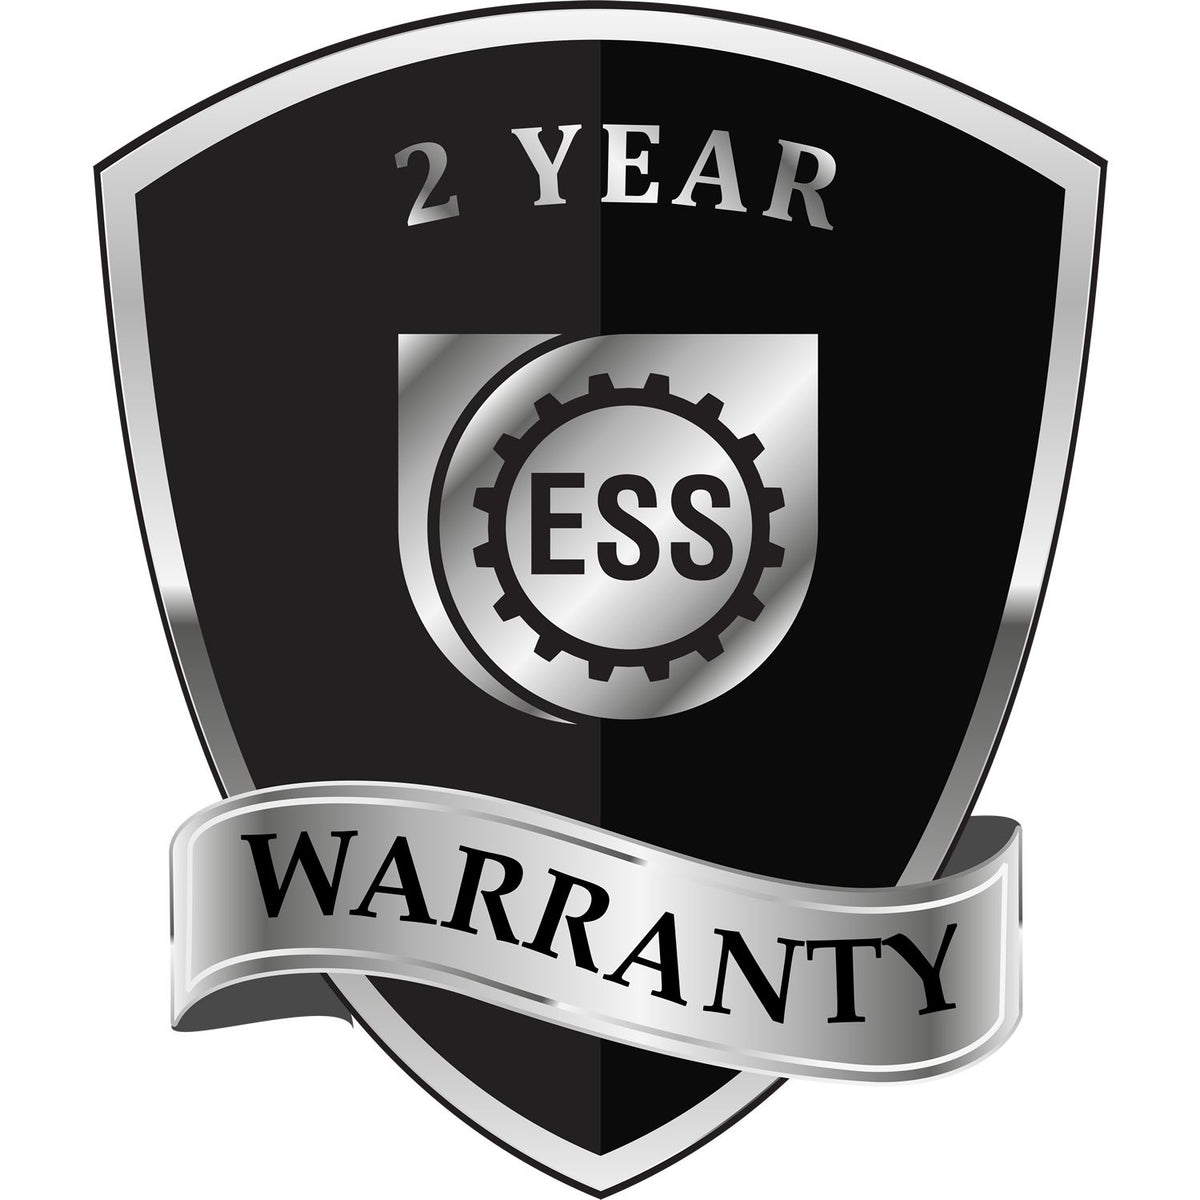 A black and silver badge or emblem showing warranty information for the Louisiana Geologist Desk Seal